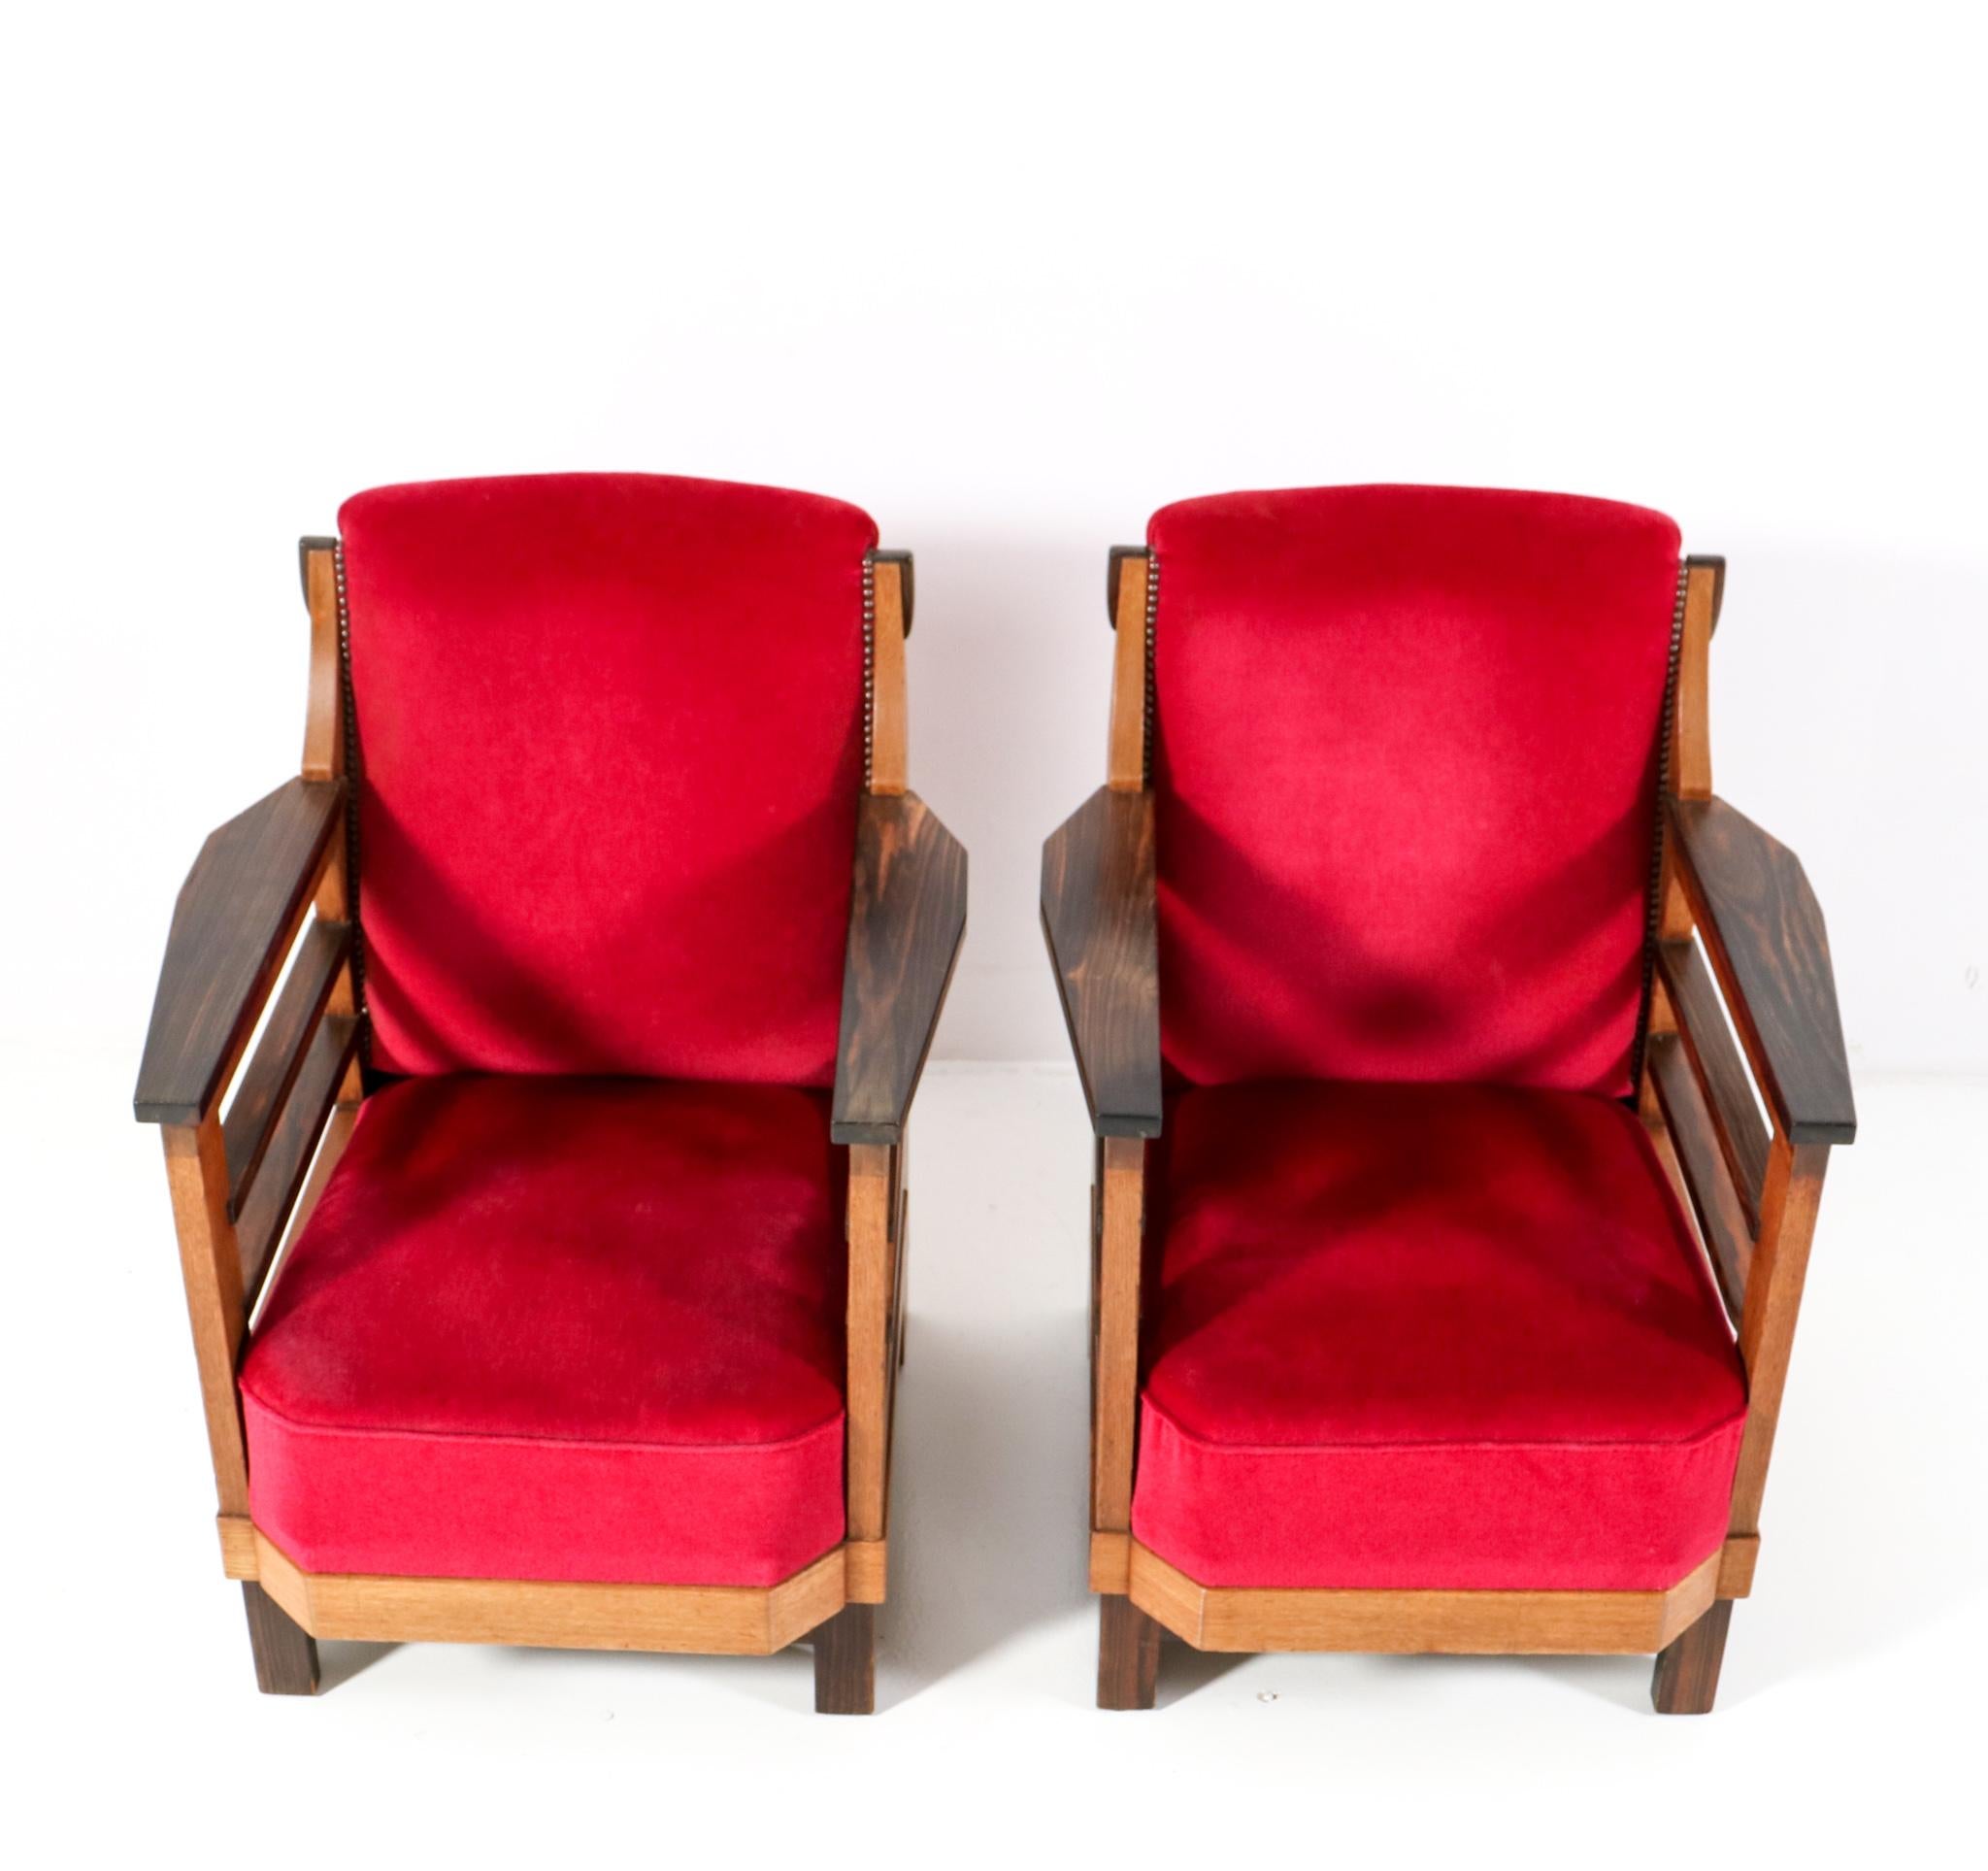 Early 20th Century Pair of Art Deco Amsterdamse School Lounge Chairs by Anton Lucas Leiden, 1920s For Sale